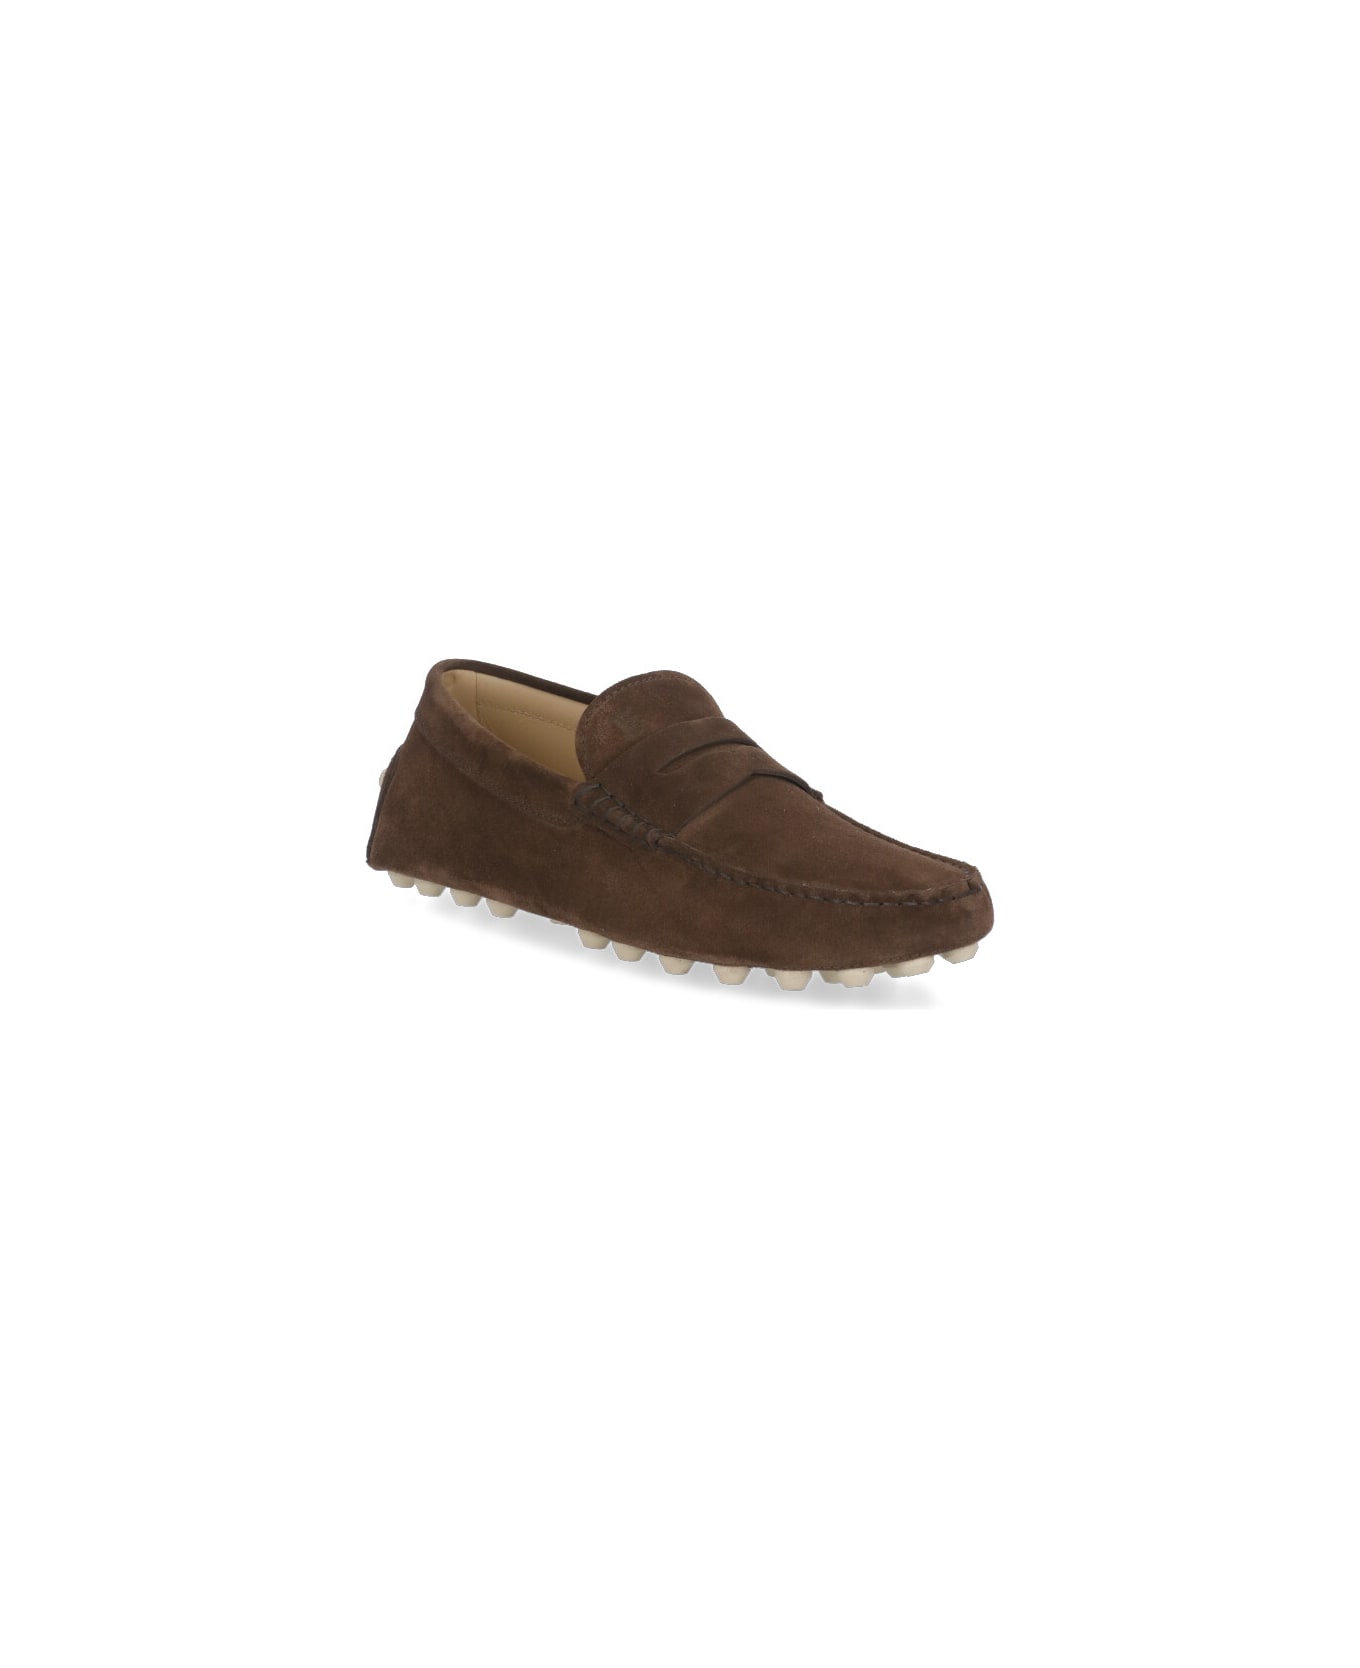 Tod's Loafers - Brown